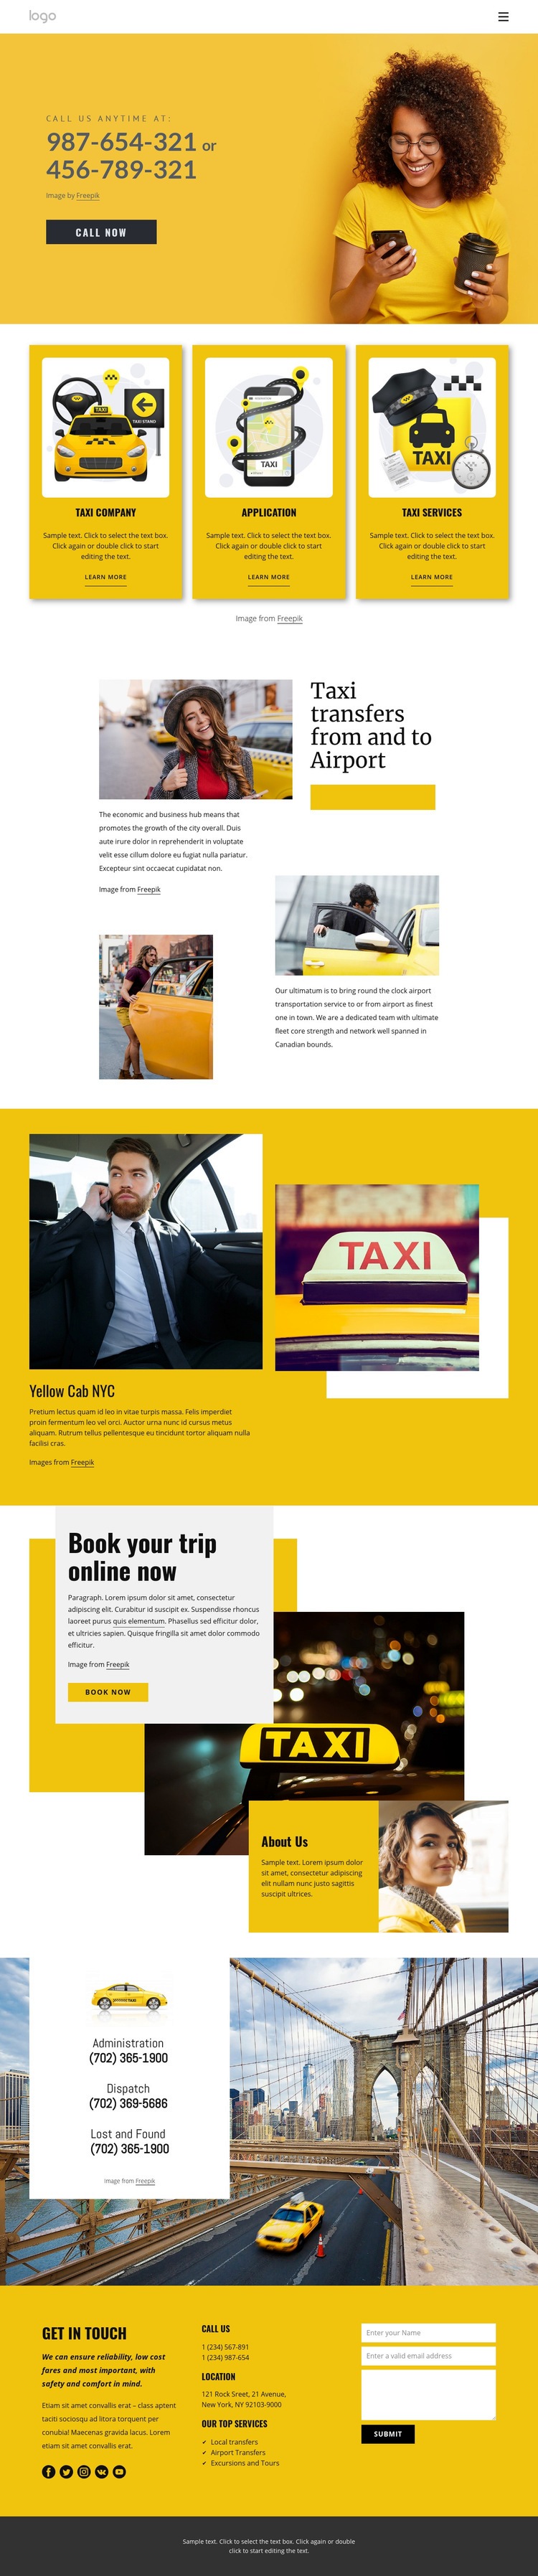 Quality taxi service Web Page Design